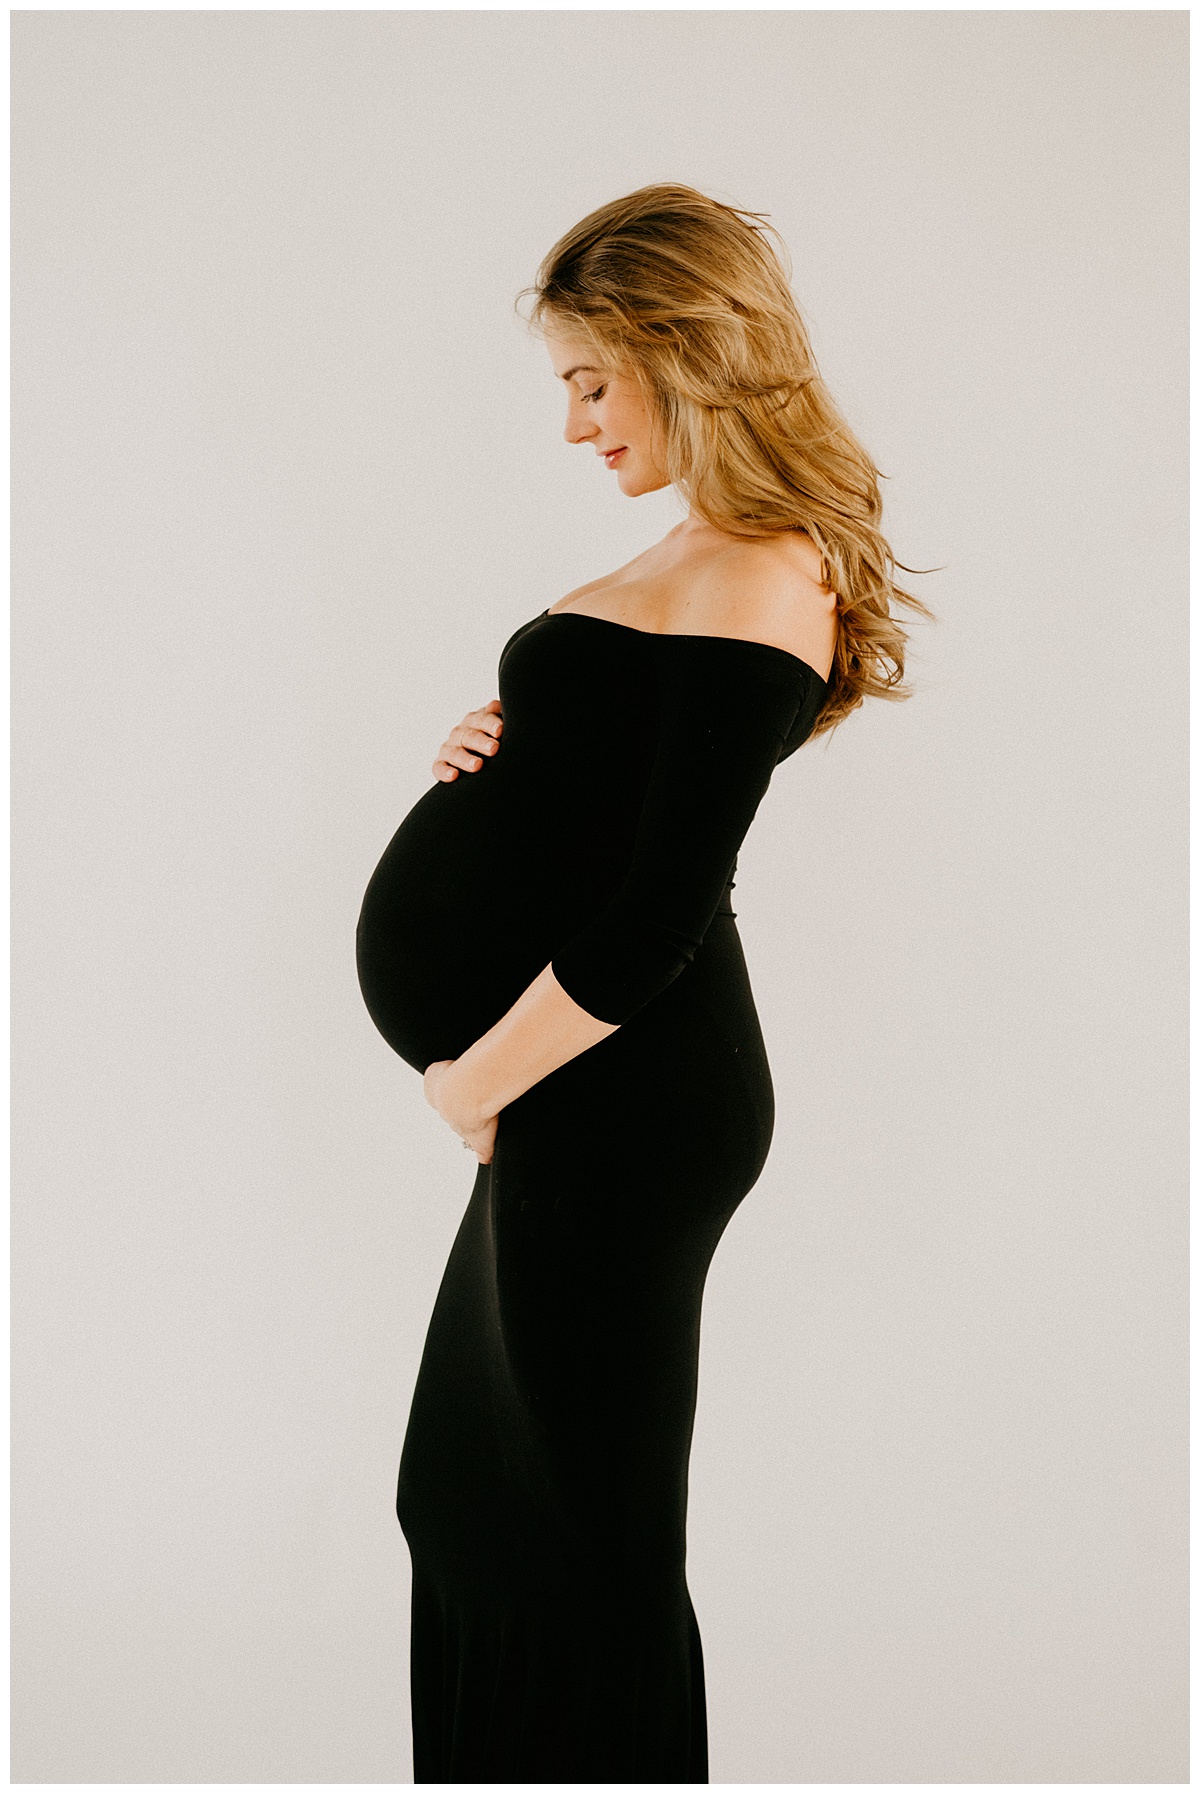 WHAT COLORS TO WEAR FOR YOUR MATERNITY PHOTOS